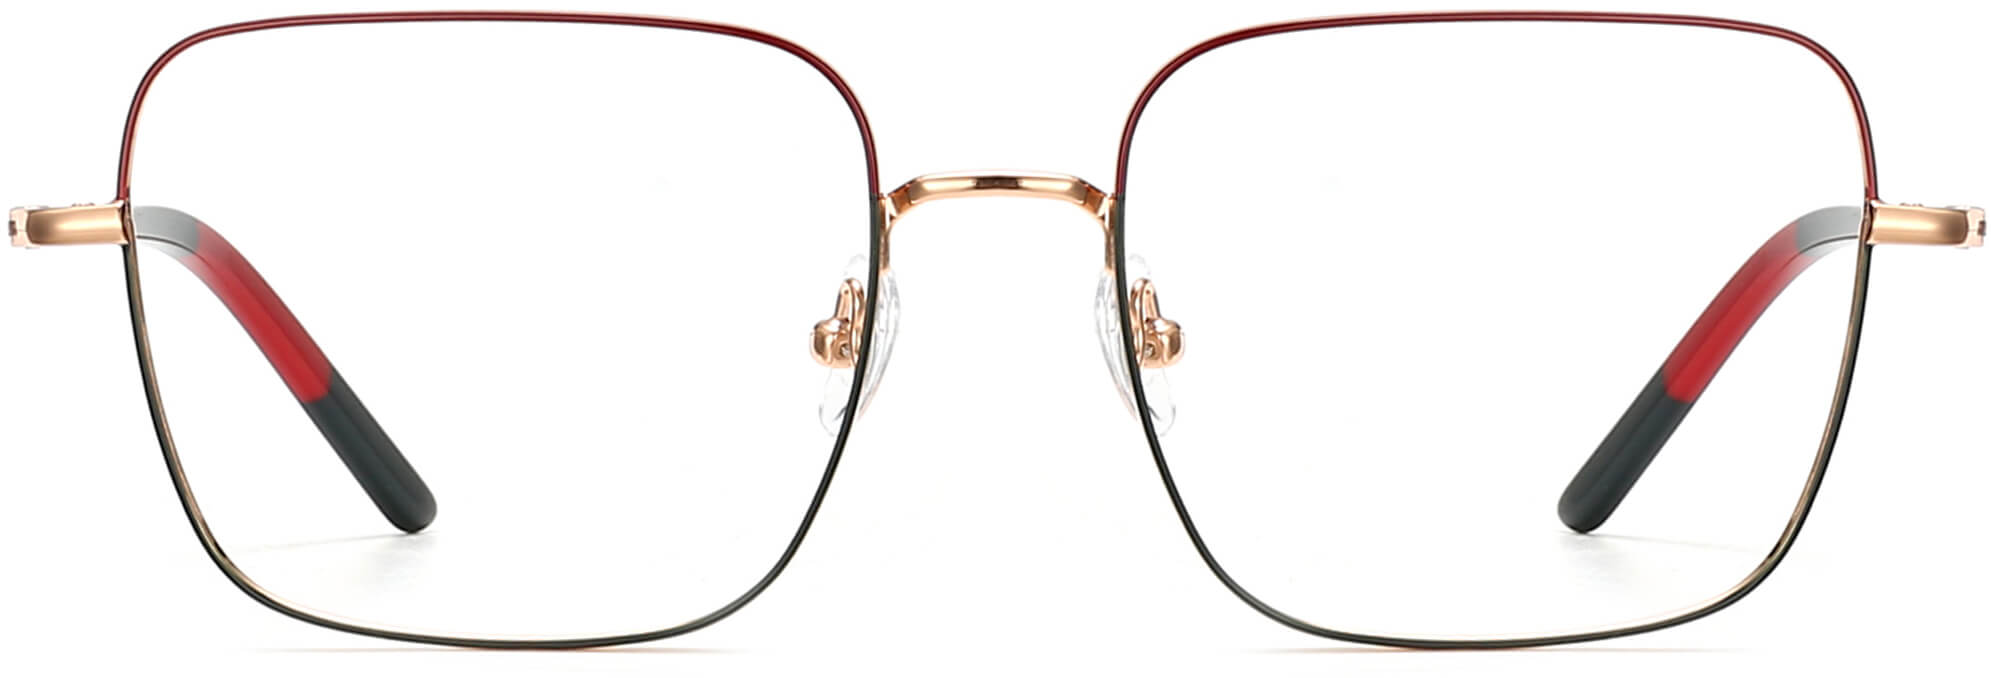 Wren Square Red Eyeglasses from ANRRI, front view